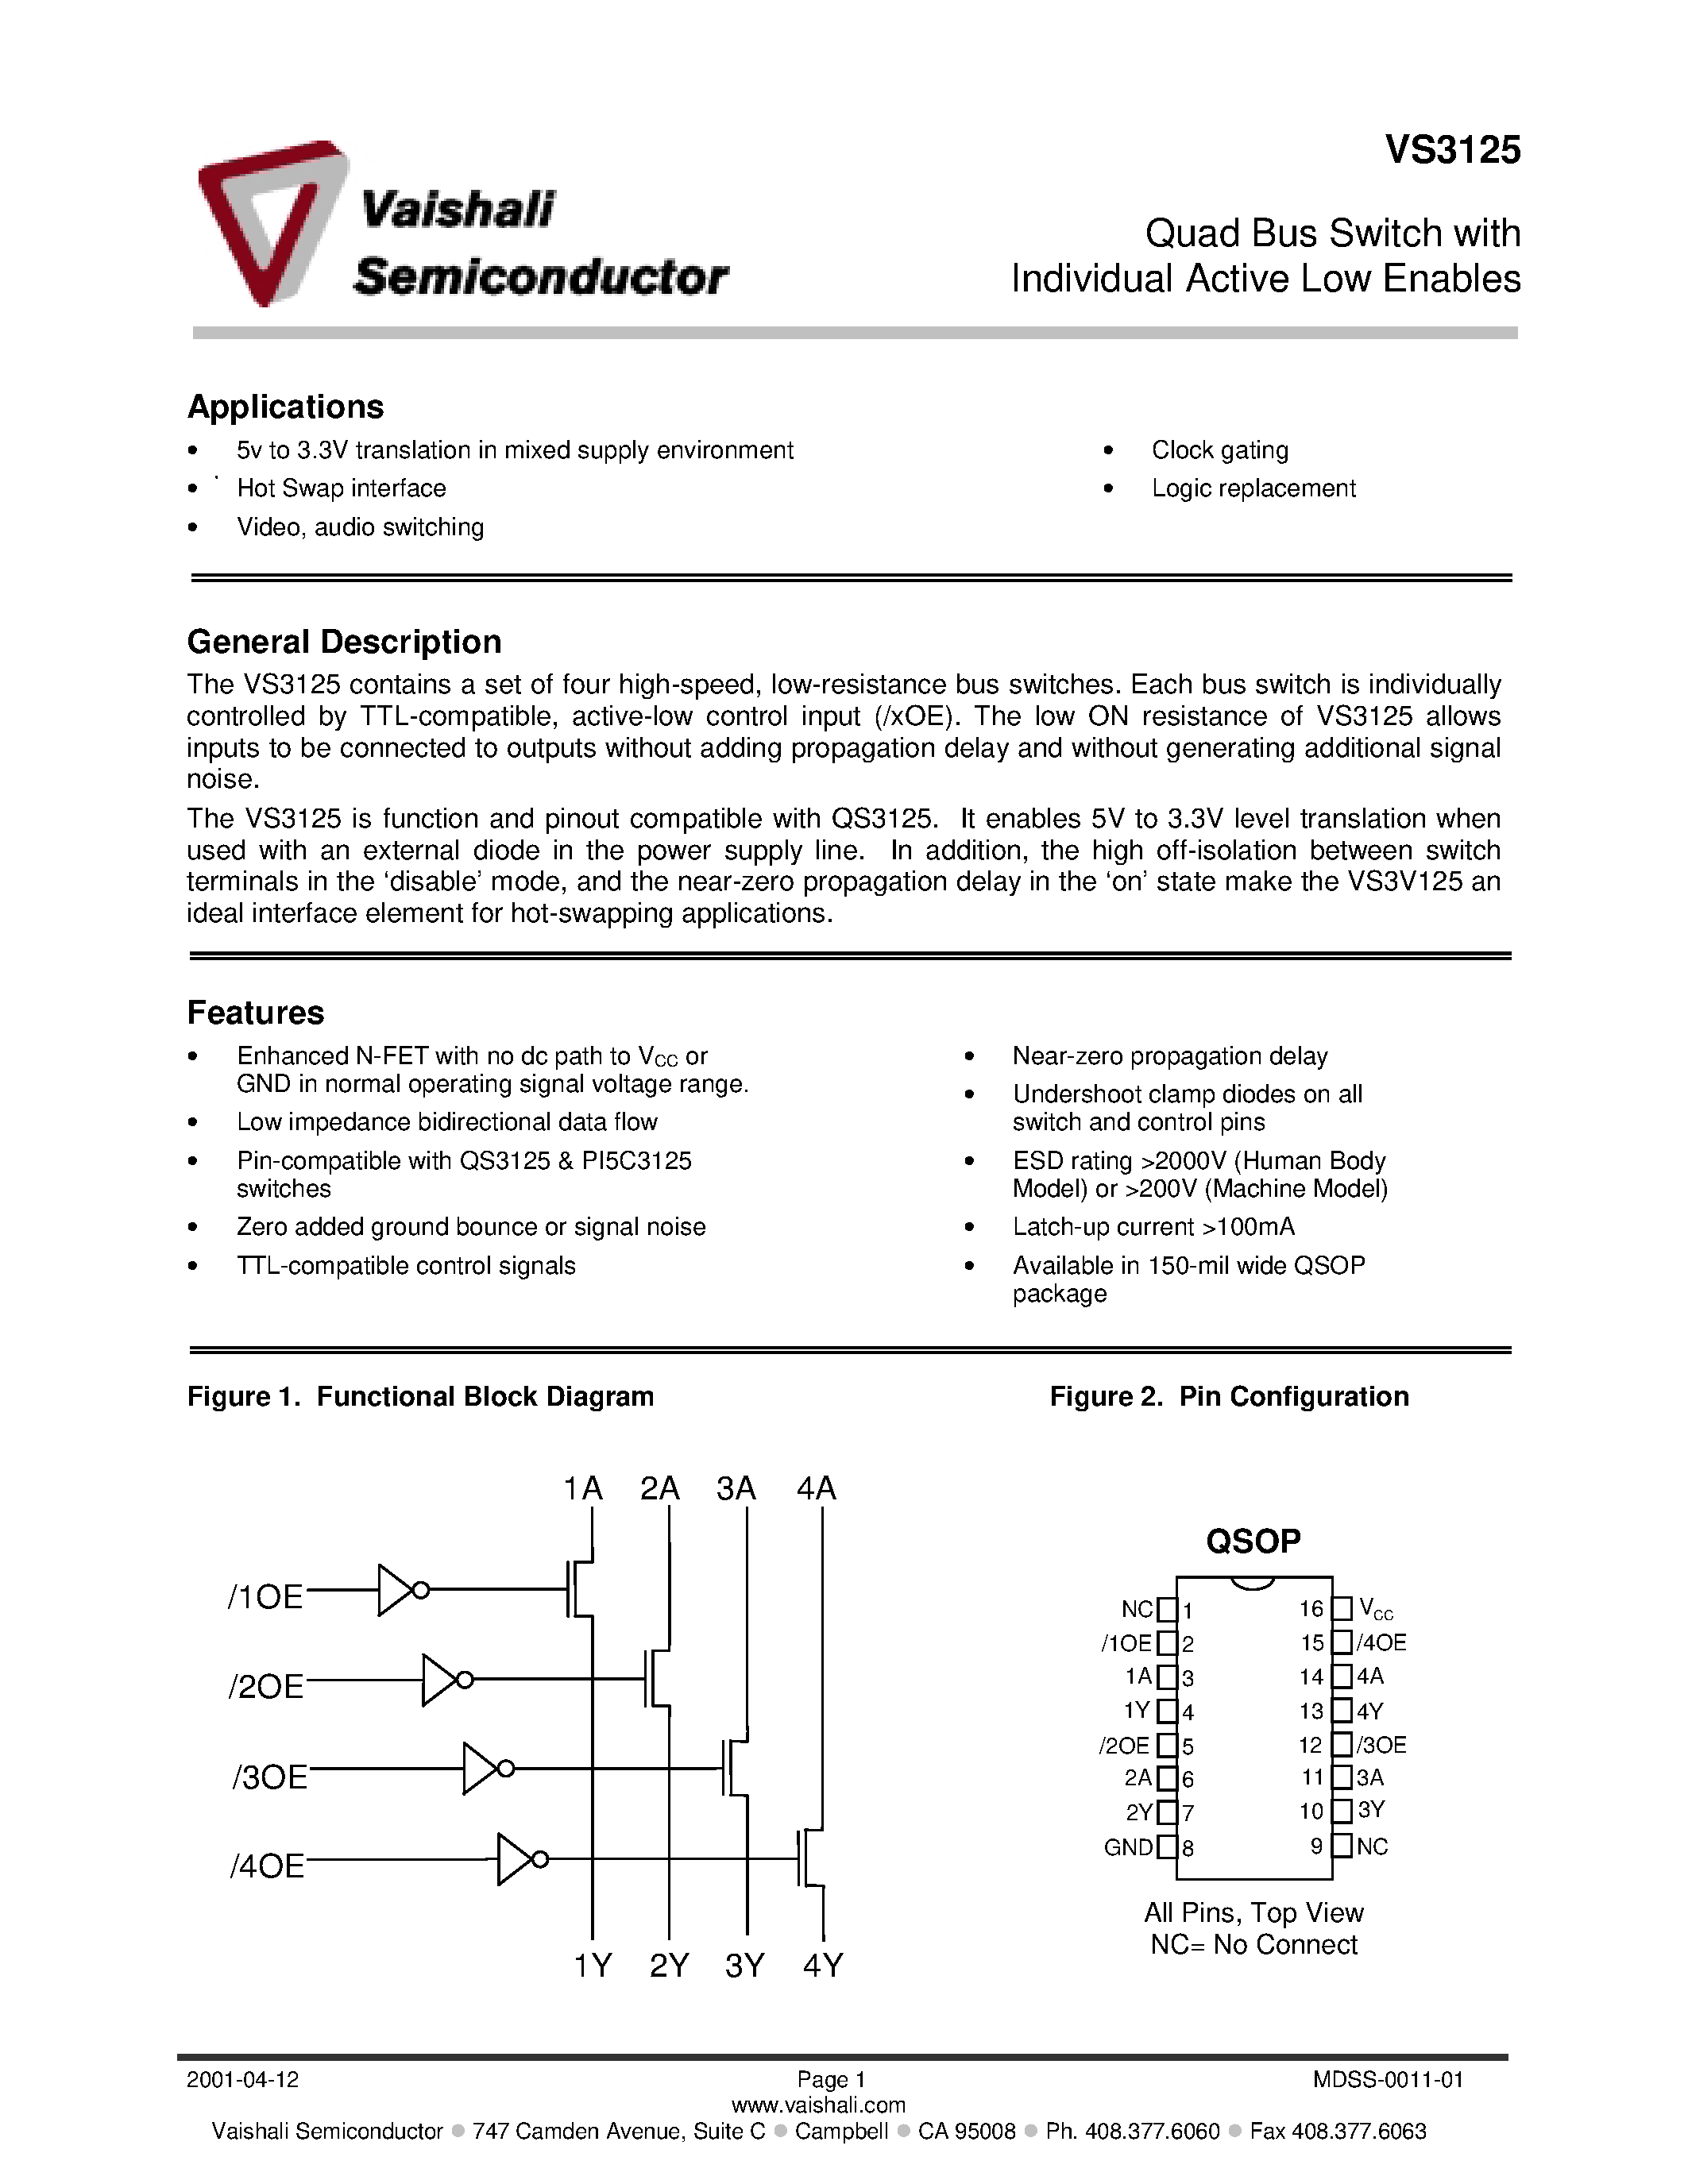 Datasheet VS3125Q - Quad Bus Switch with Individual Active Low Enables page 1